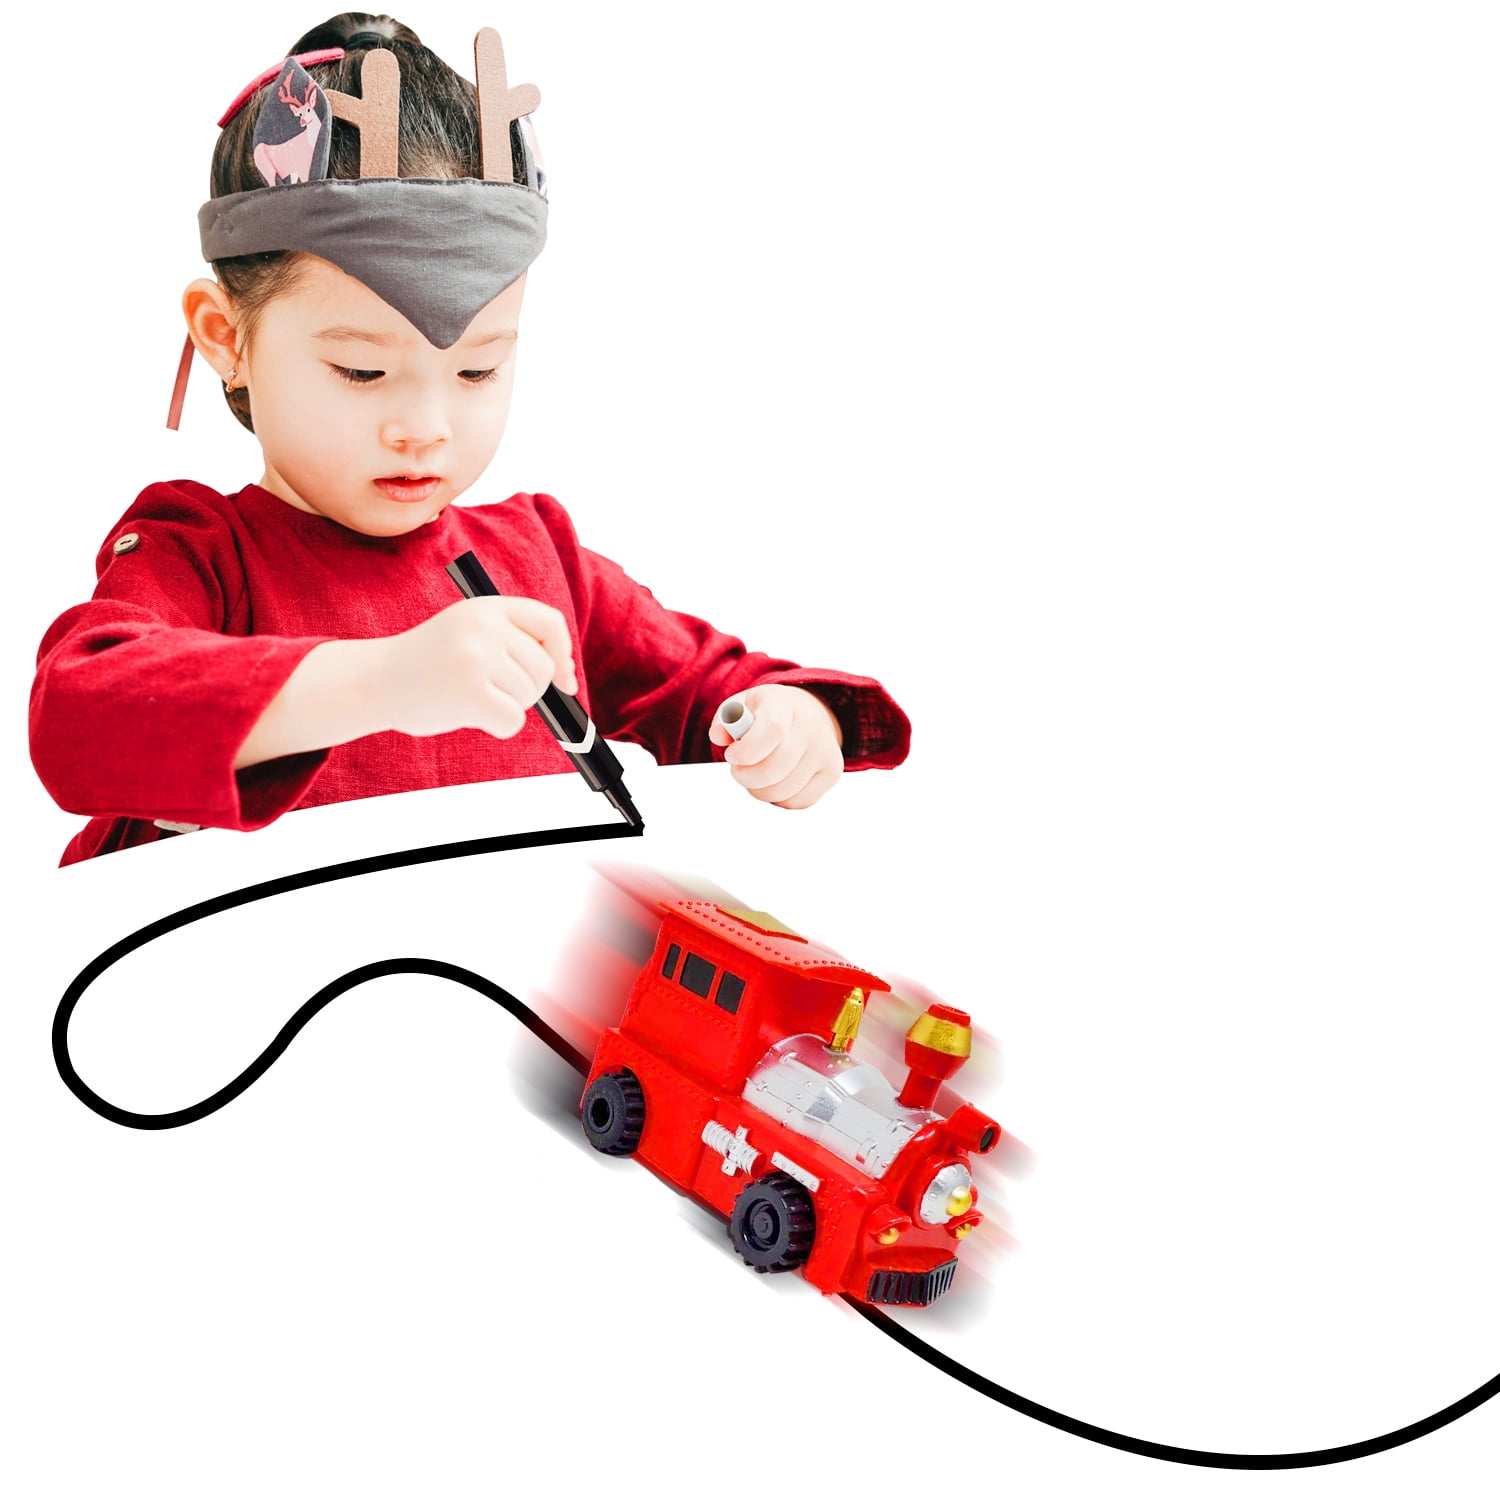 Magic Inductive Mini Robot Truck Car Toys Follow Black Lines Educational Cool Toys for Kids 4 5 6 7 8 9 10 11 12 Years Old 